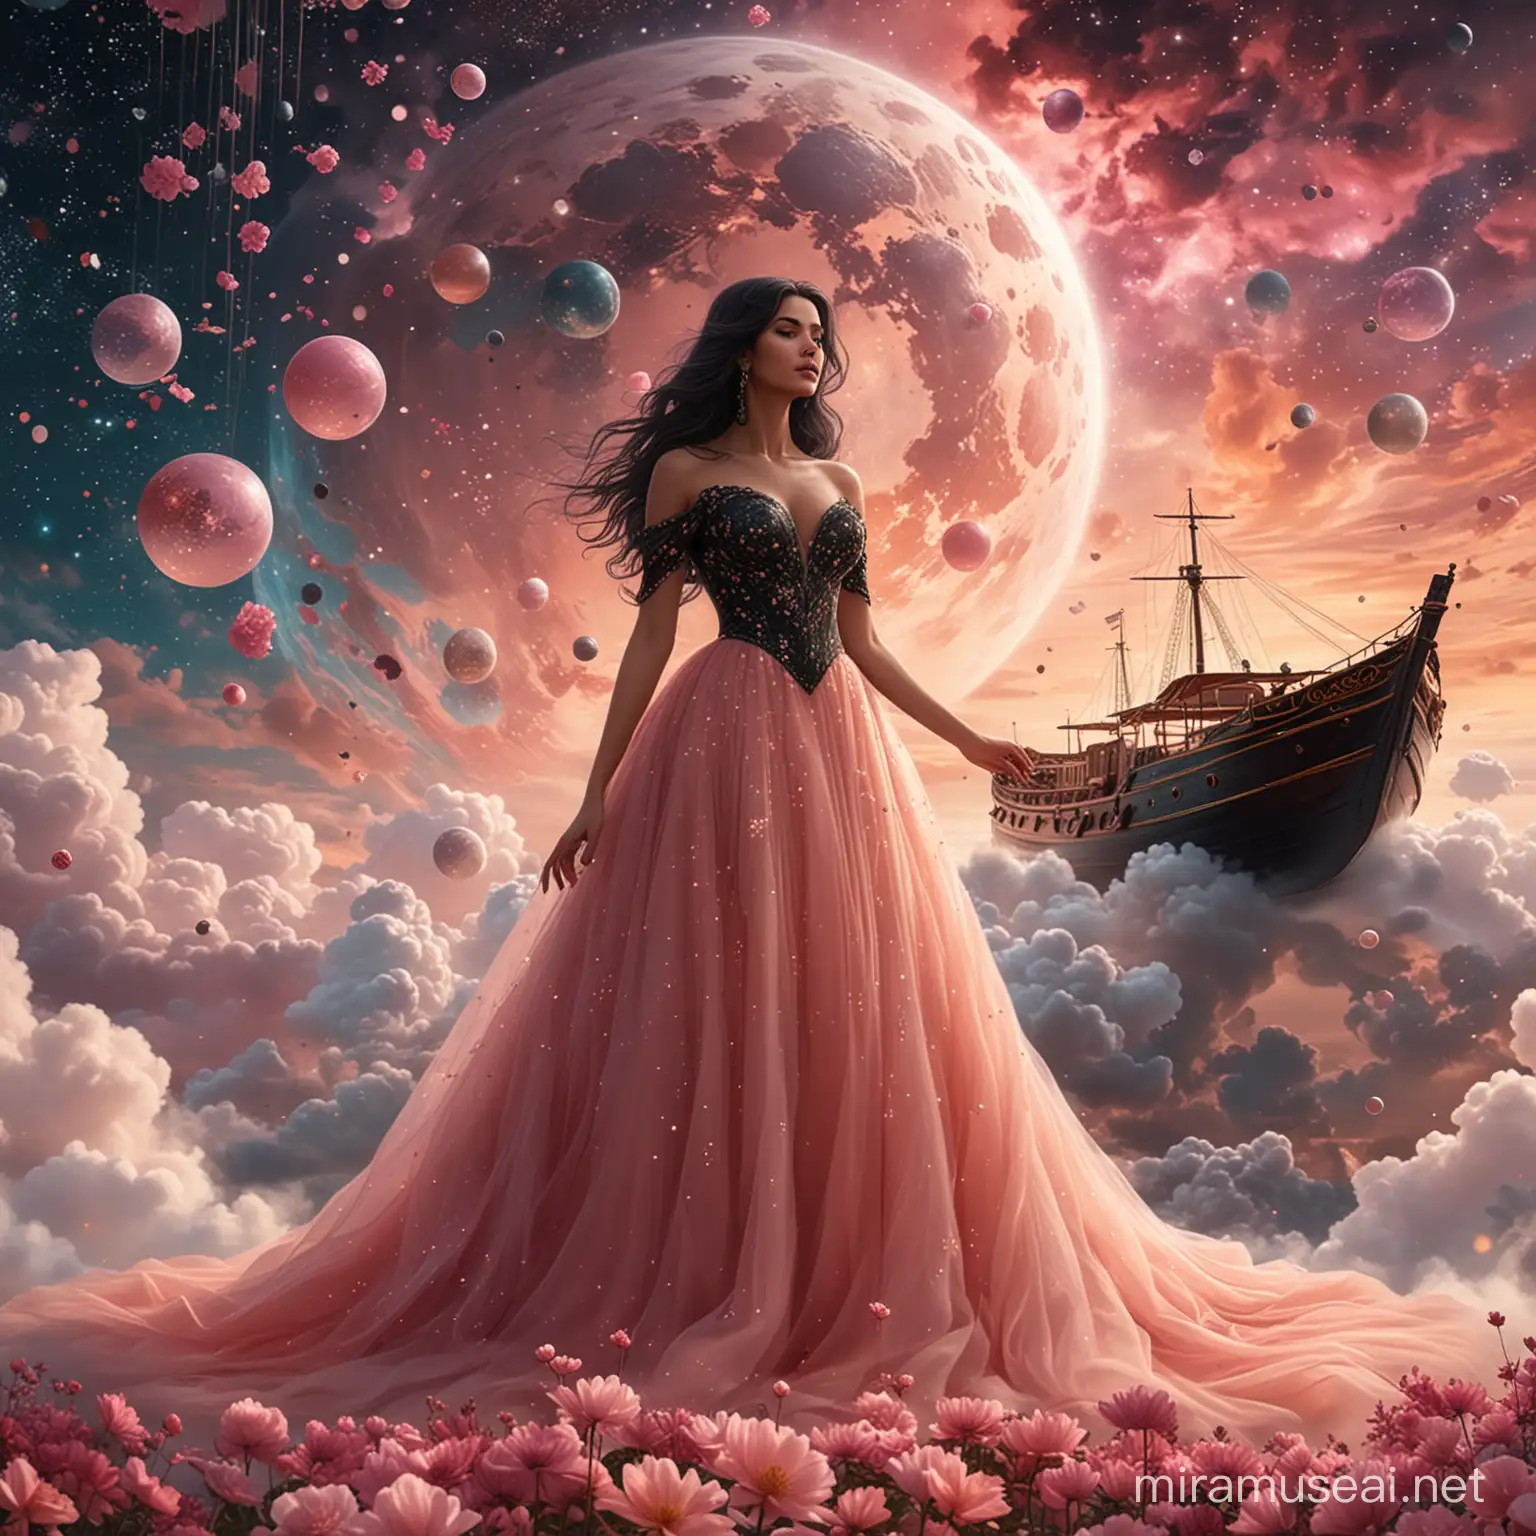 Elegant Woman Collecting Balls on Cloud with Floral Boat and Nebula Sky